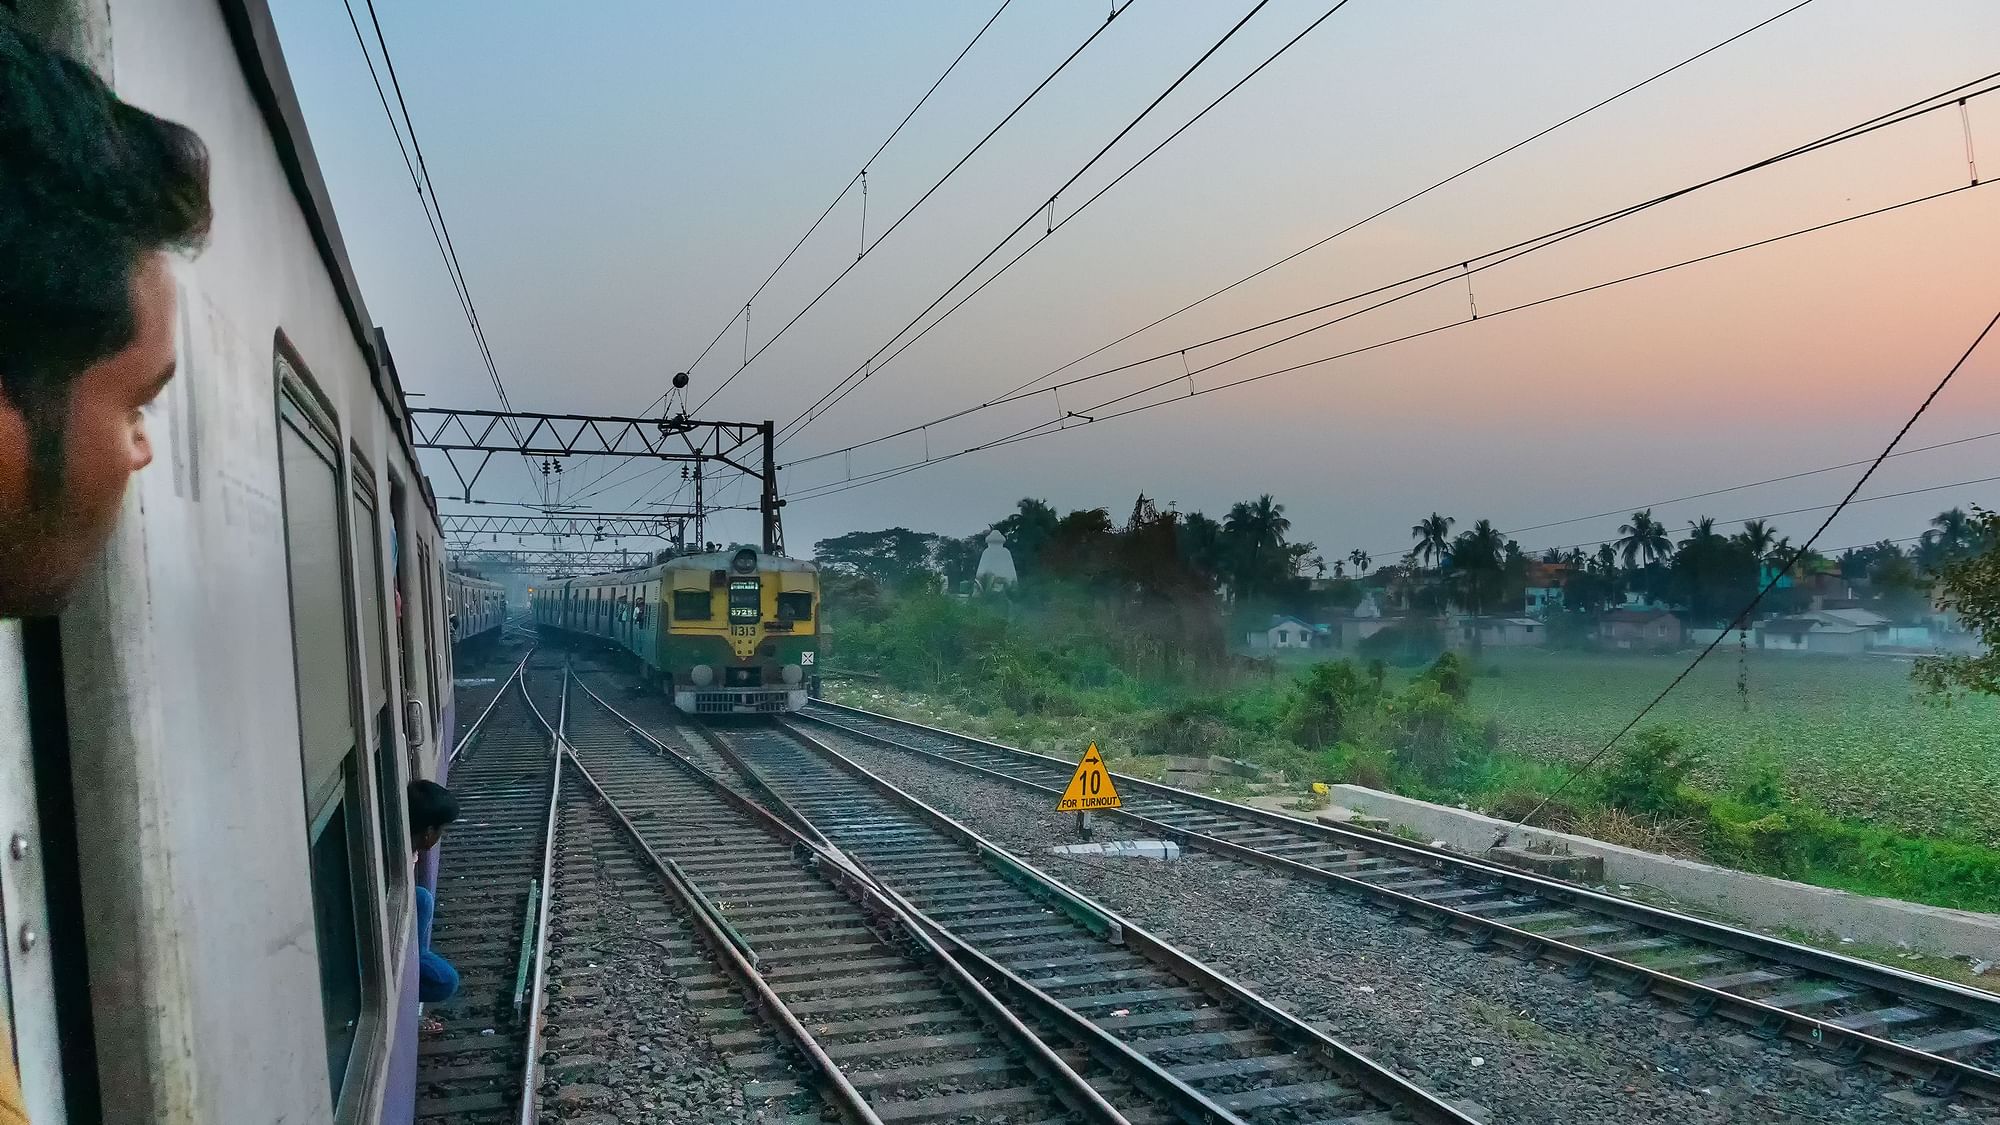 Railways Recruitment 2019: The last date to apply for SCR Apprentices Post is 8 December 2019.